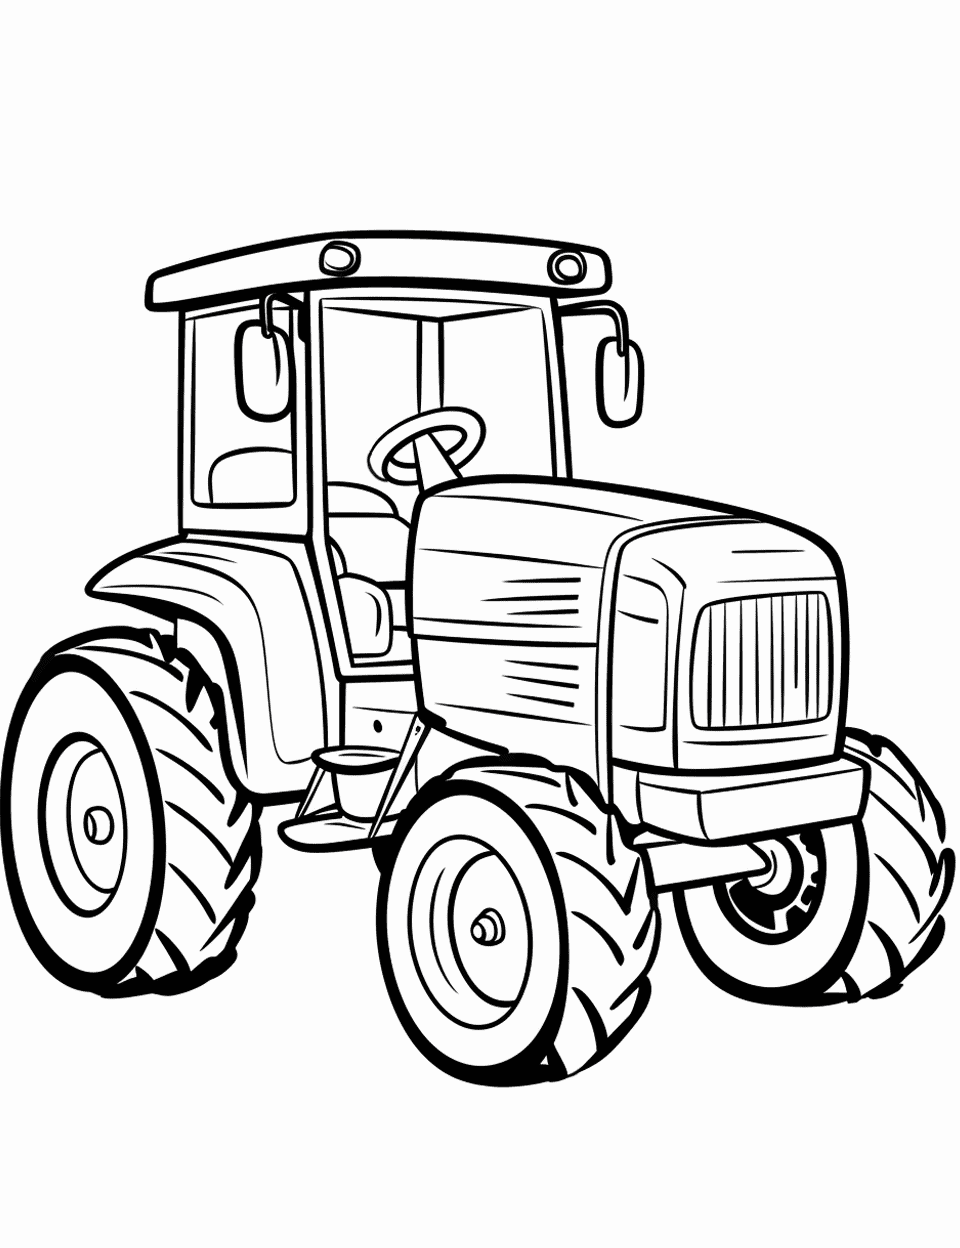 Easy Tractor Outline for Beginners Coloring Page - A simple, easy-to-color outline of a basic tractor, suitable for young children.